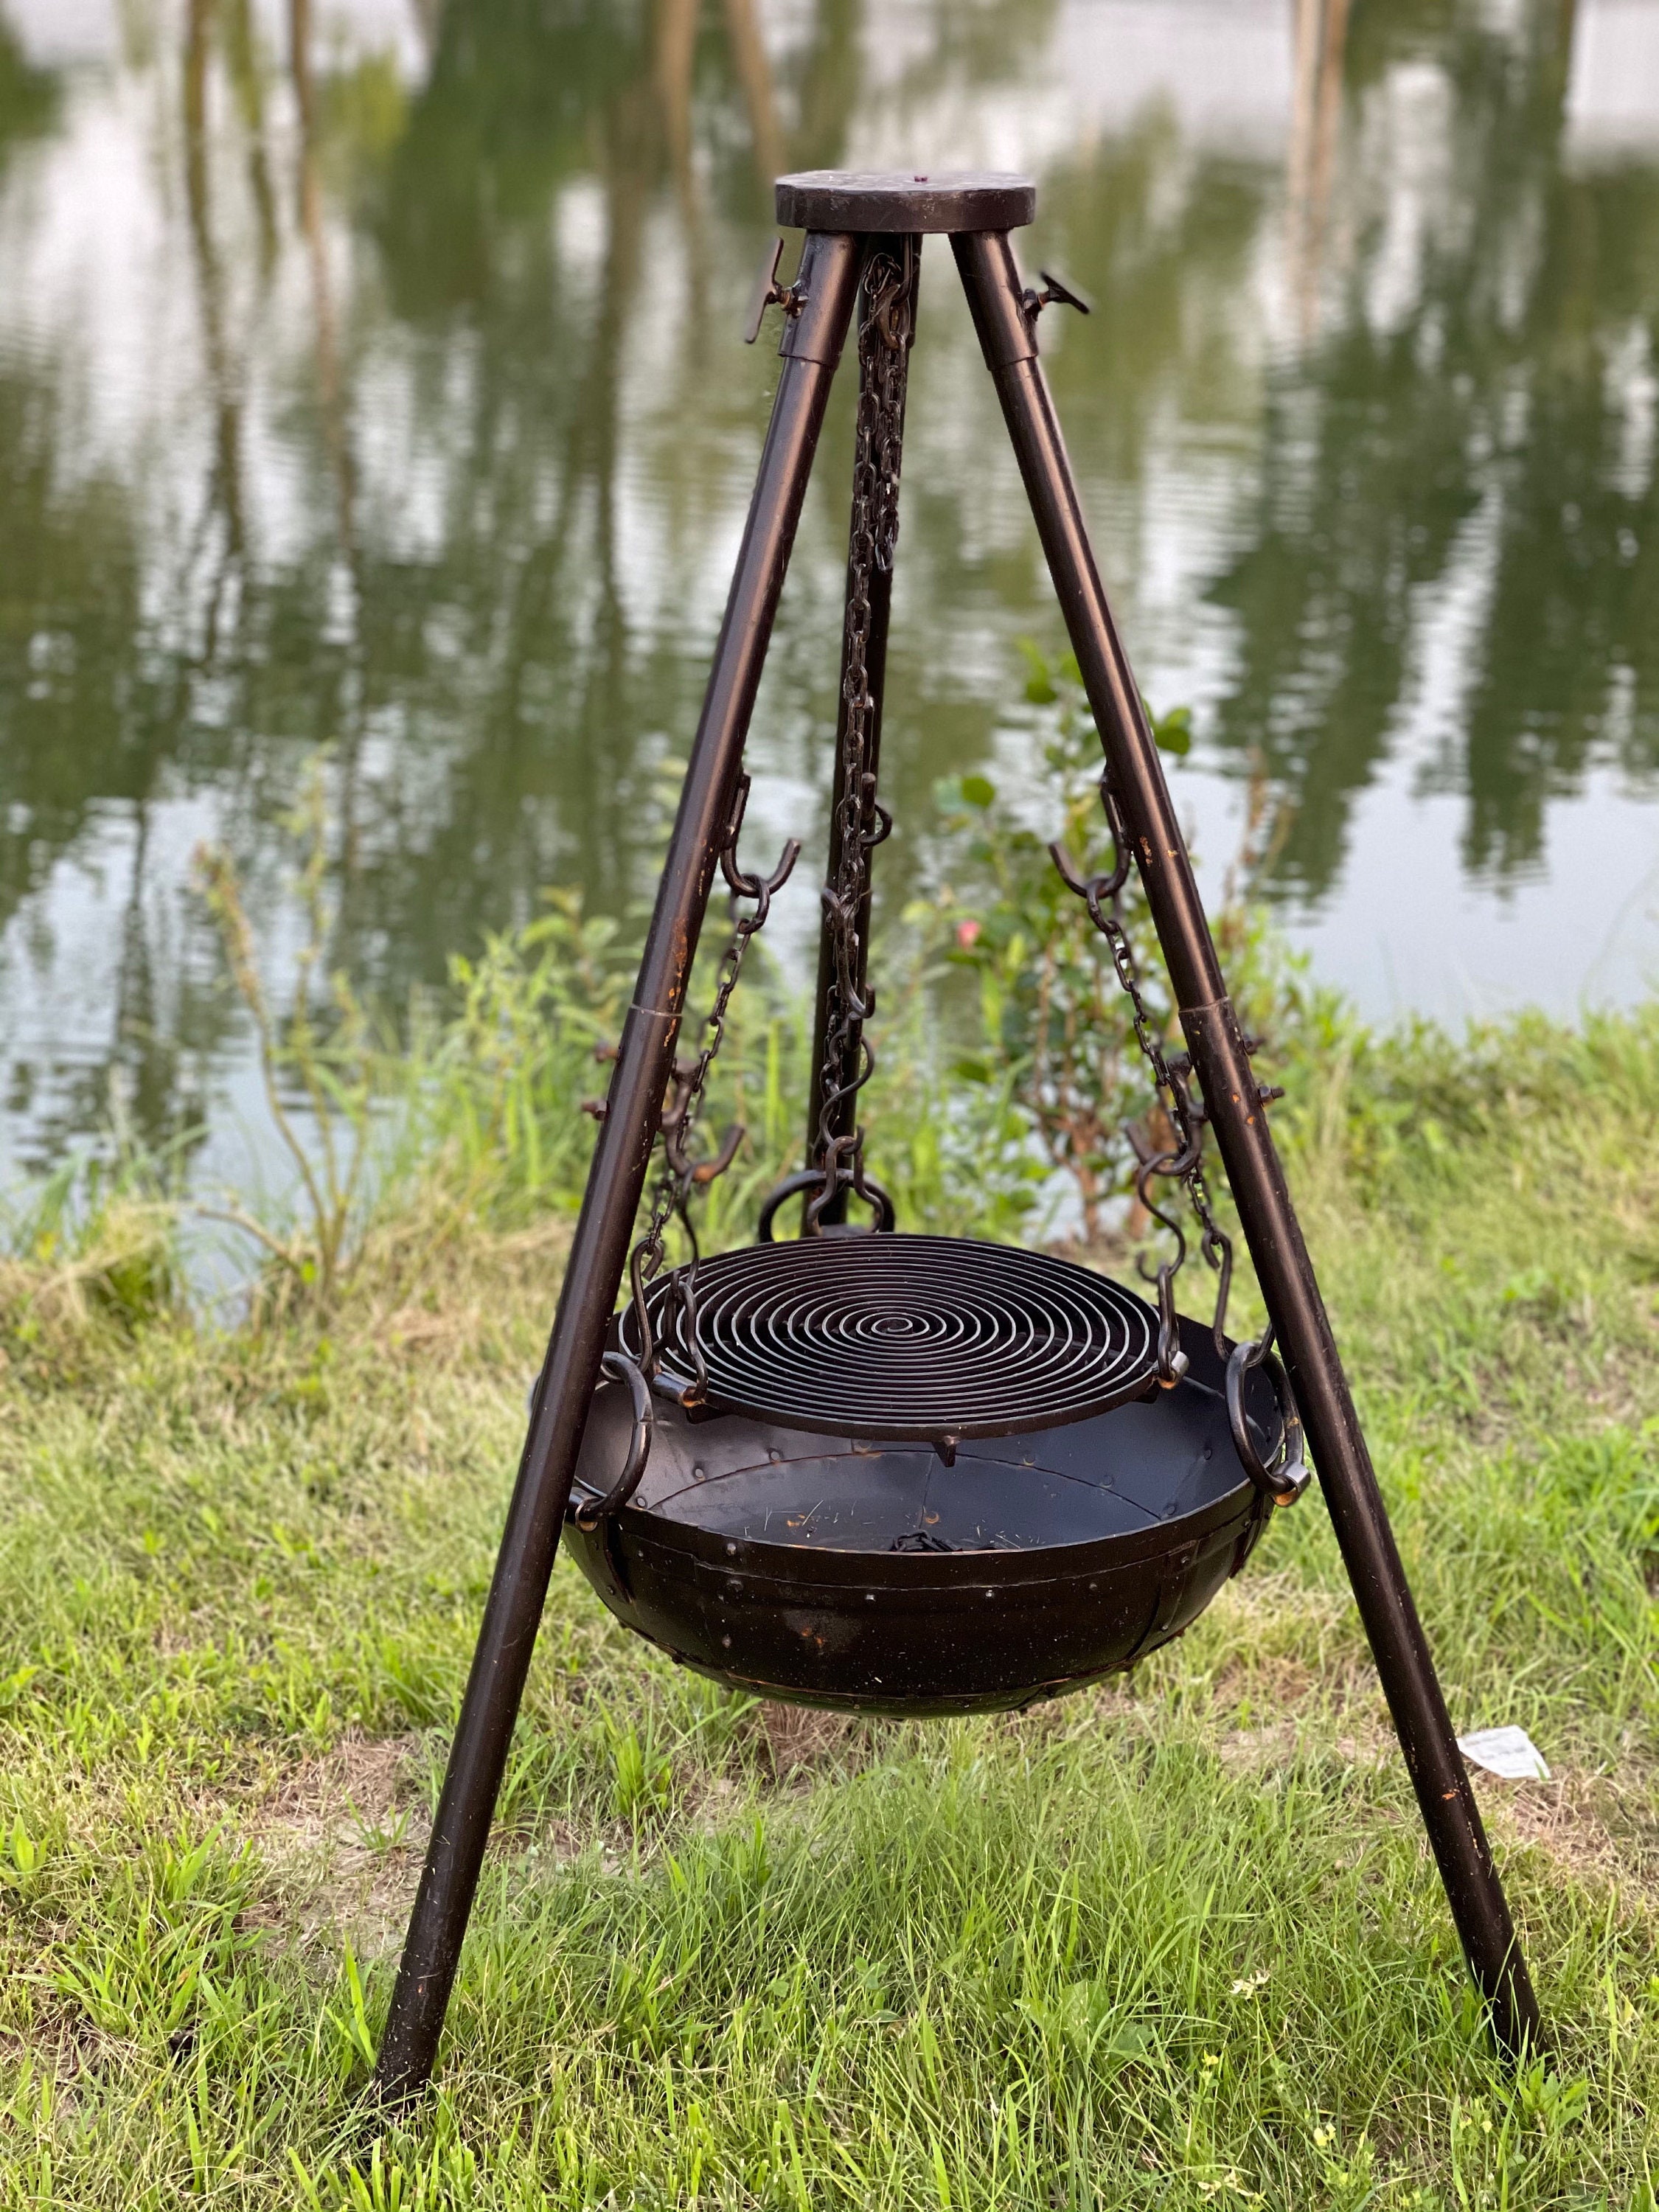 Rugged Tri-pod Grill Set With Hanging Firepit and Grill Grate